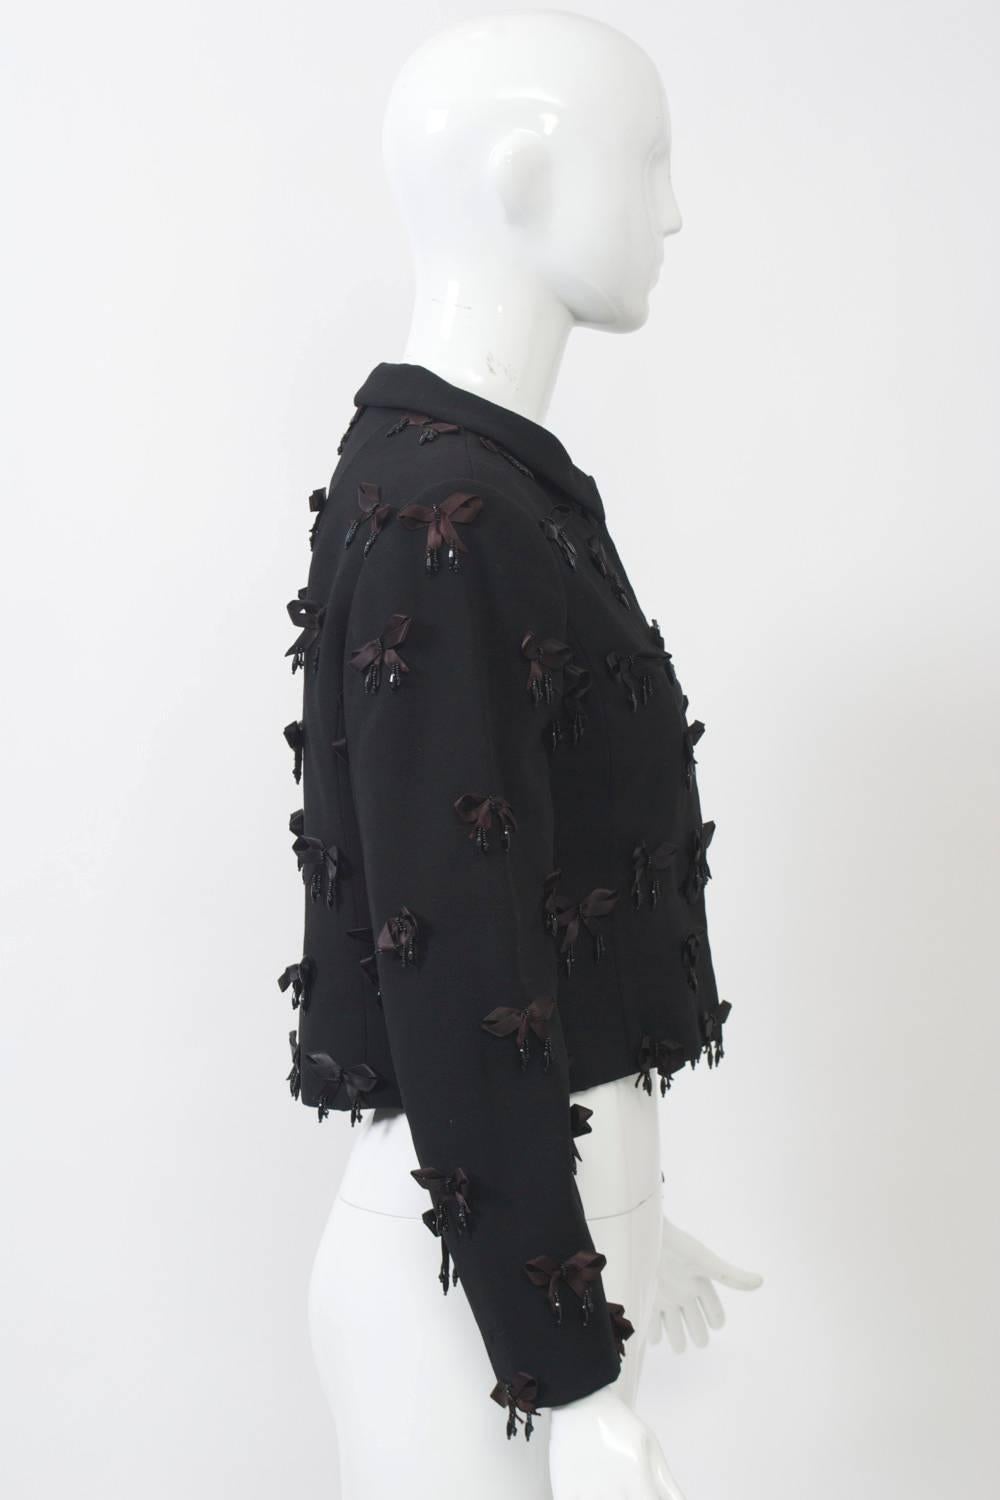 Early Bill Blass jacket in black wool embellished all over with satin and beaded bows features a small collar, bound buttonholes with satin buttons, and is shape at the waist. Fully lined.